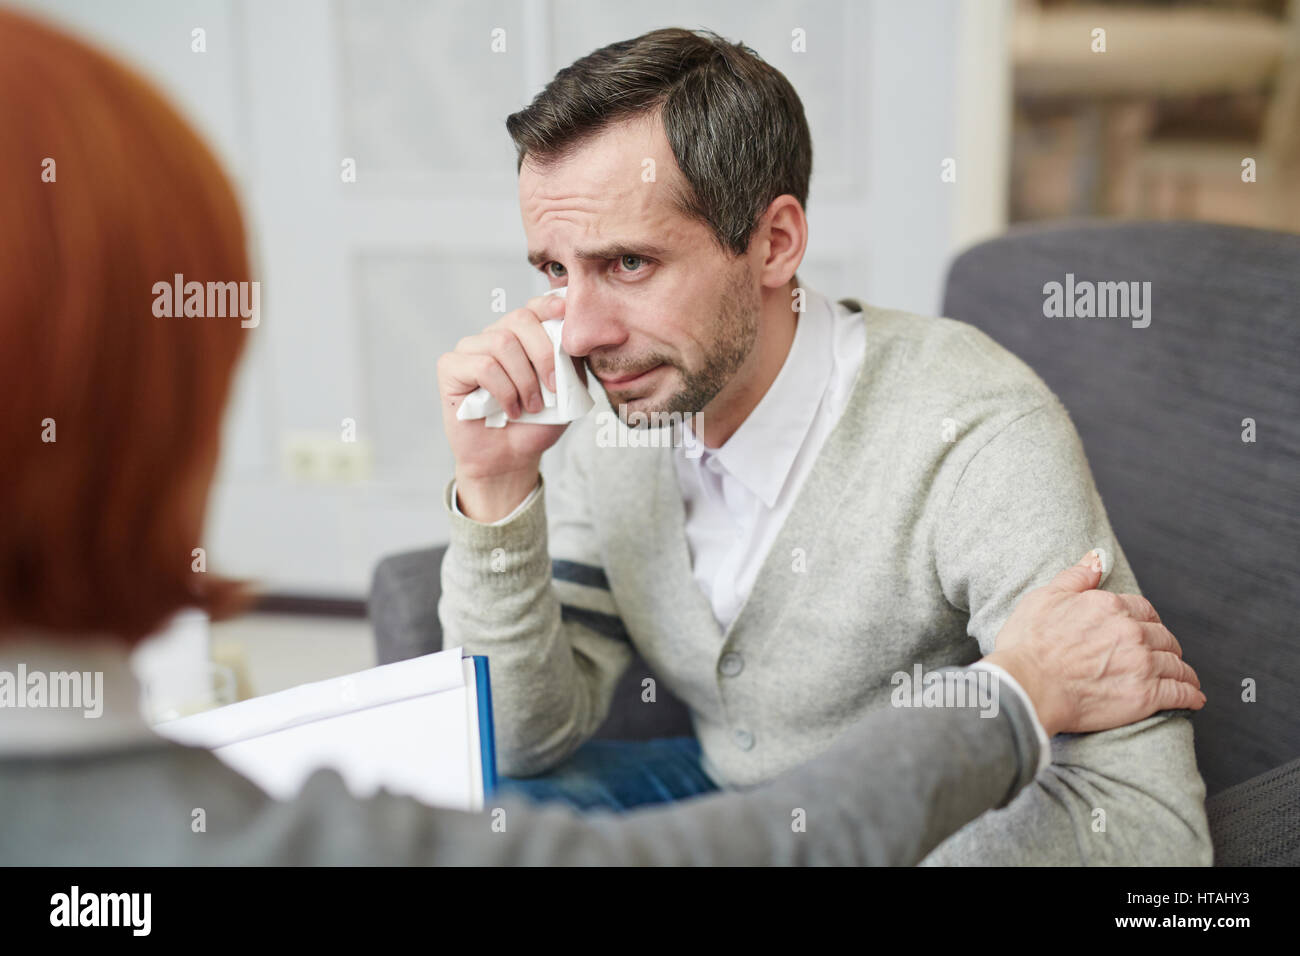 Crying man addicted to alcohol listening to his counselor Stock Photo